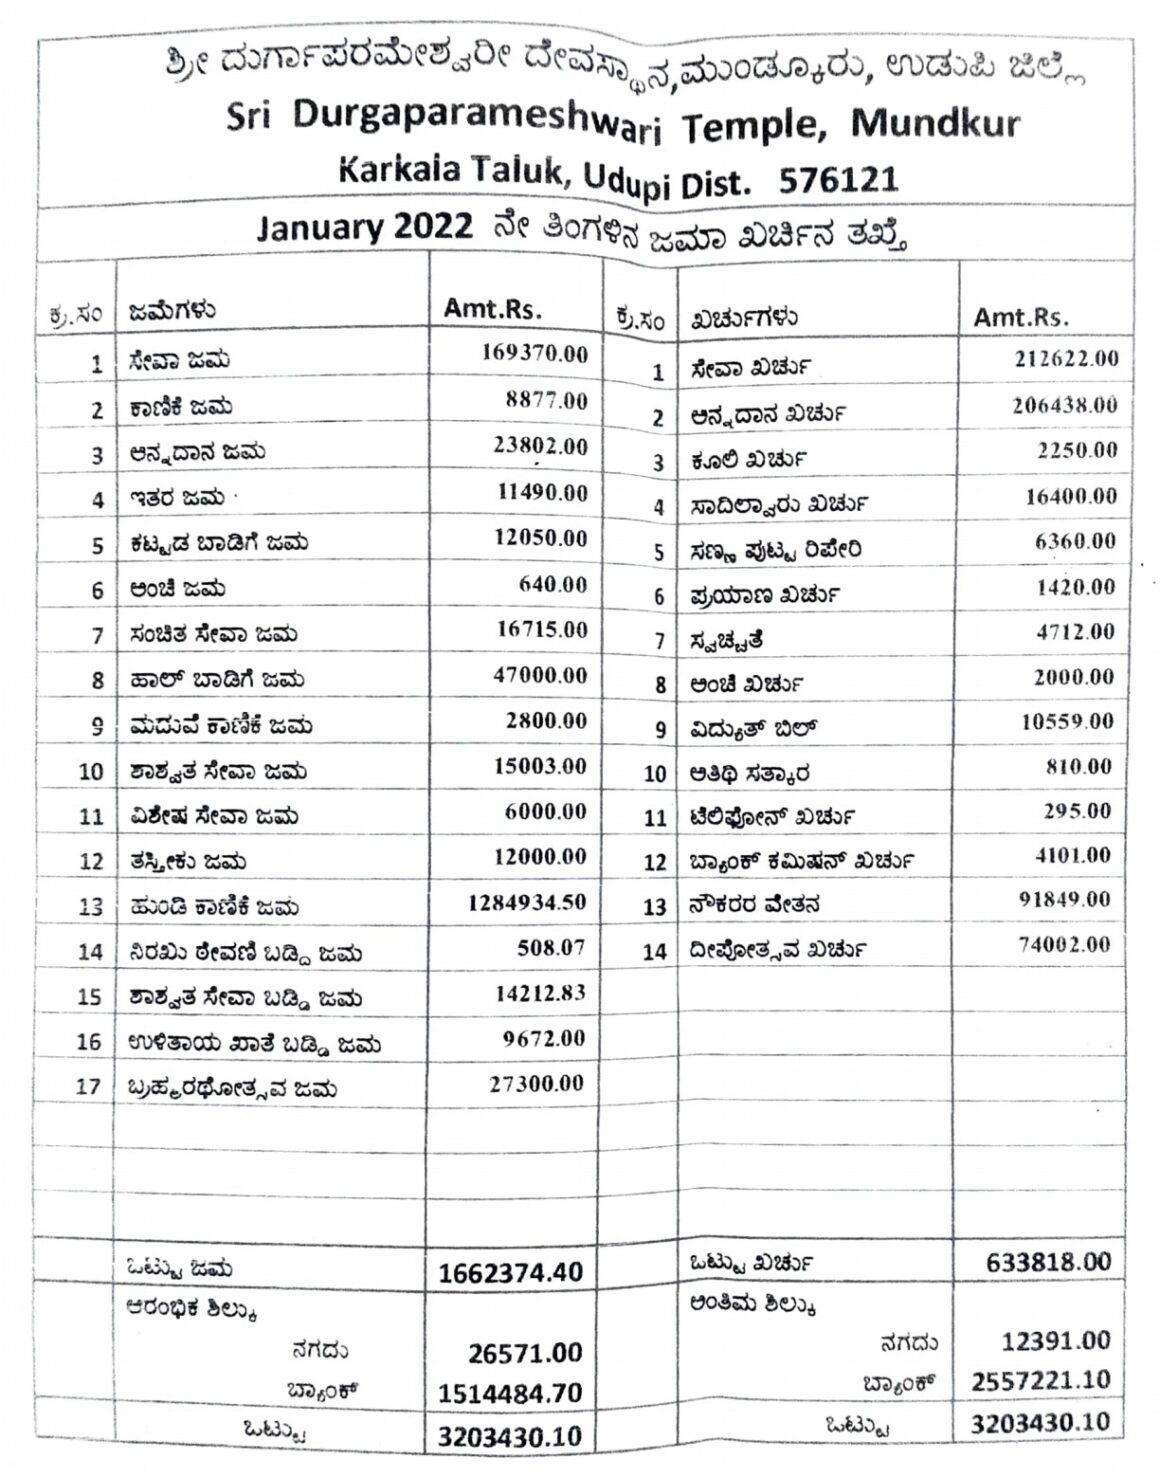 Unaudited Receipts & Payment Details for January – 2022